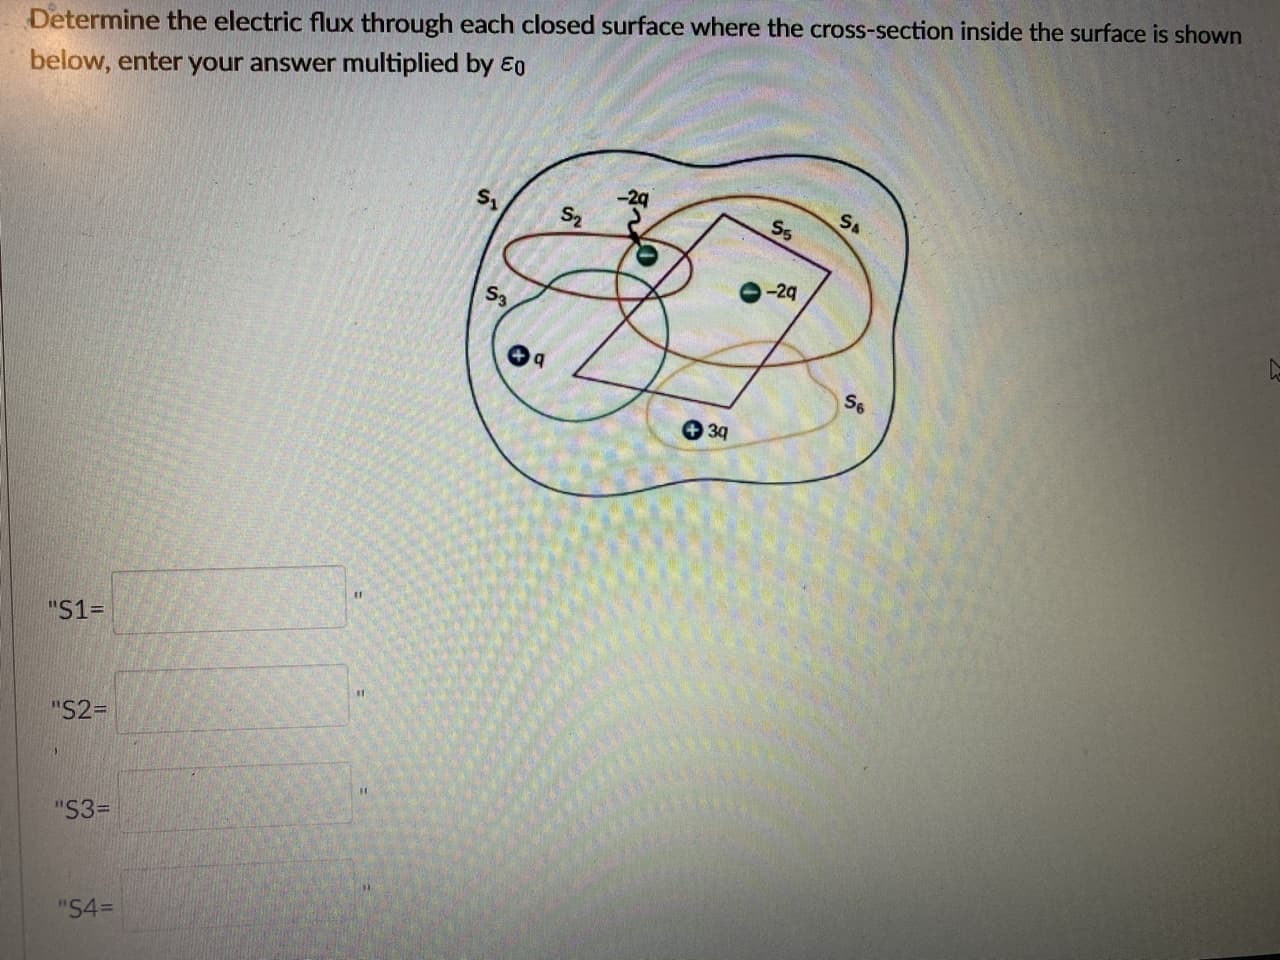 Determine the electric flux through each closed surface where the cross-section inside the surface is shown
below, enter your answer multiplied by 80
-29
S5
S2
-29
